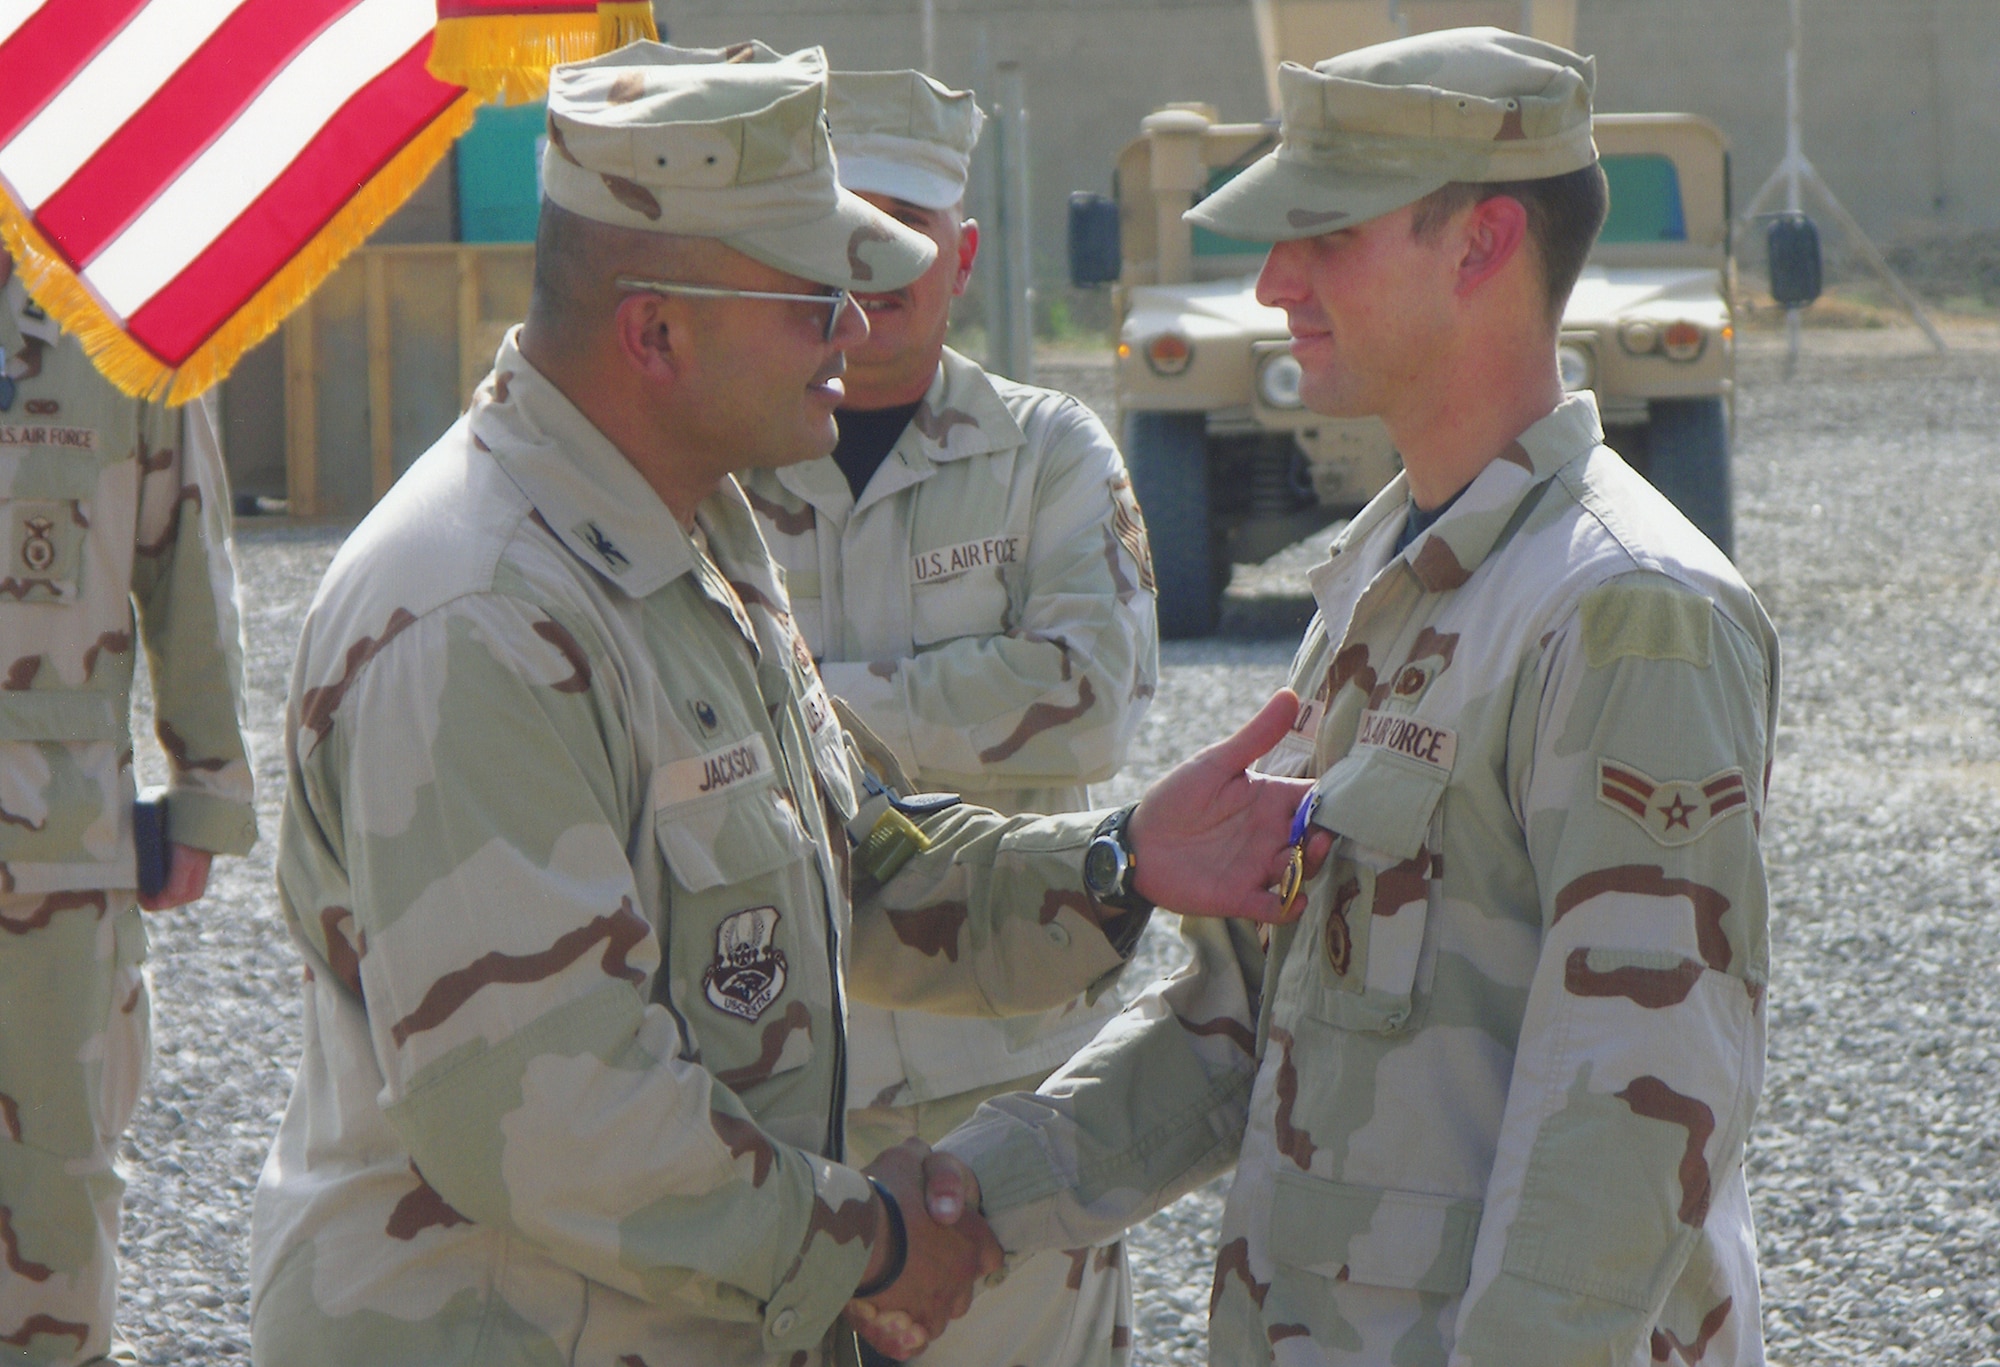 Then, Airman 1st Class Jeremy Birchfield is presented the Purple Heart in a ceremony at Camp Victory, Iraq Sept. 24, 2006. The 824th Security Forces Squadron turret gunner was hit by a sniper during patrol operations Sept. 22, 2006. He is the first Airman from the 824th SFS to receive the medal. (U.S. Air Force photo/Staff Sgt. Jesse Smith)